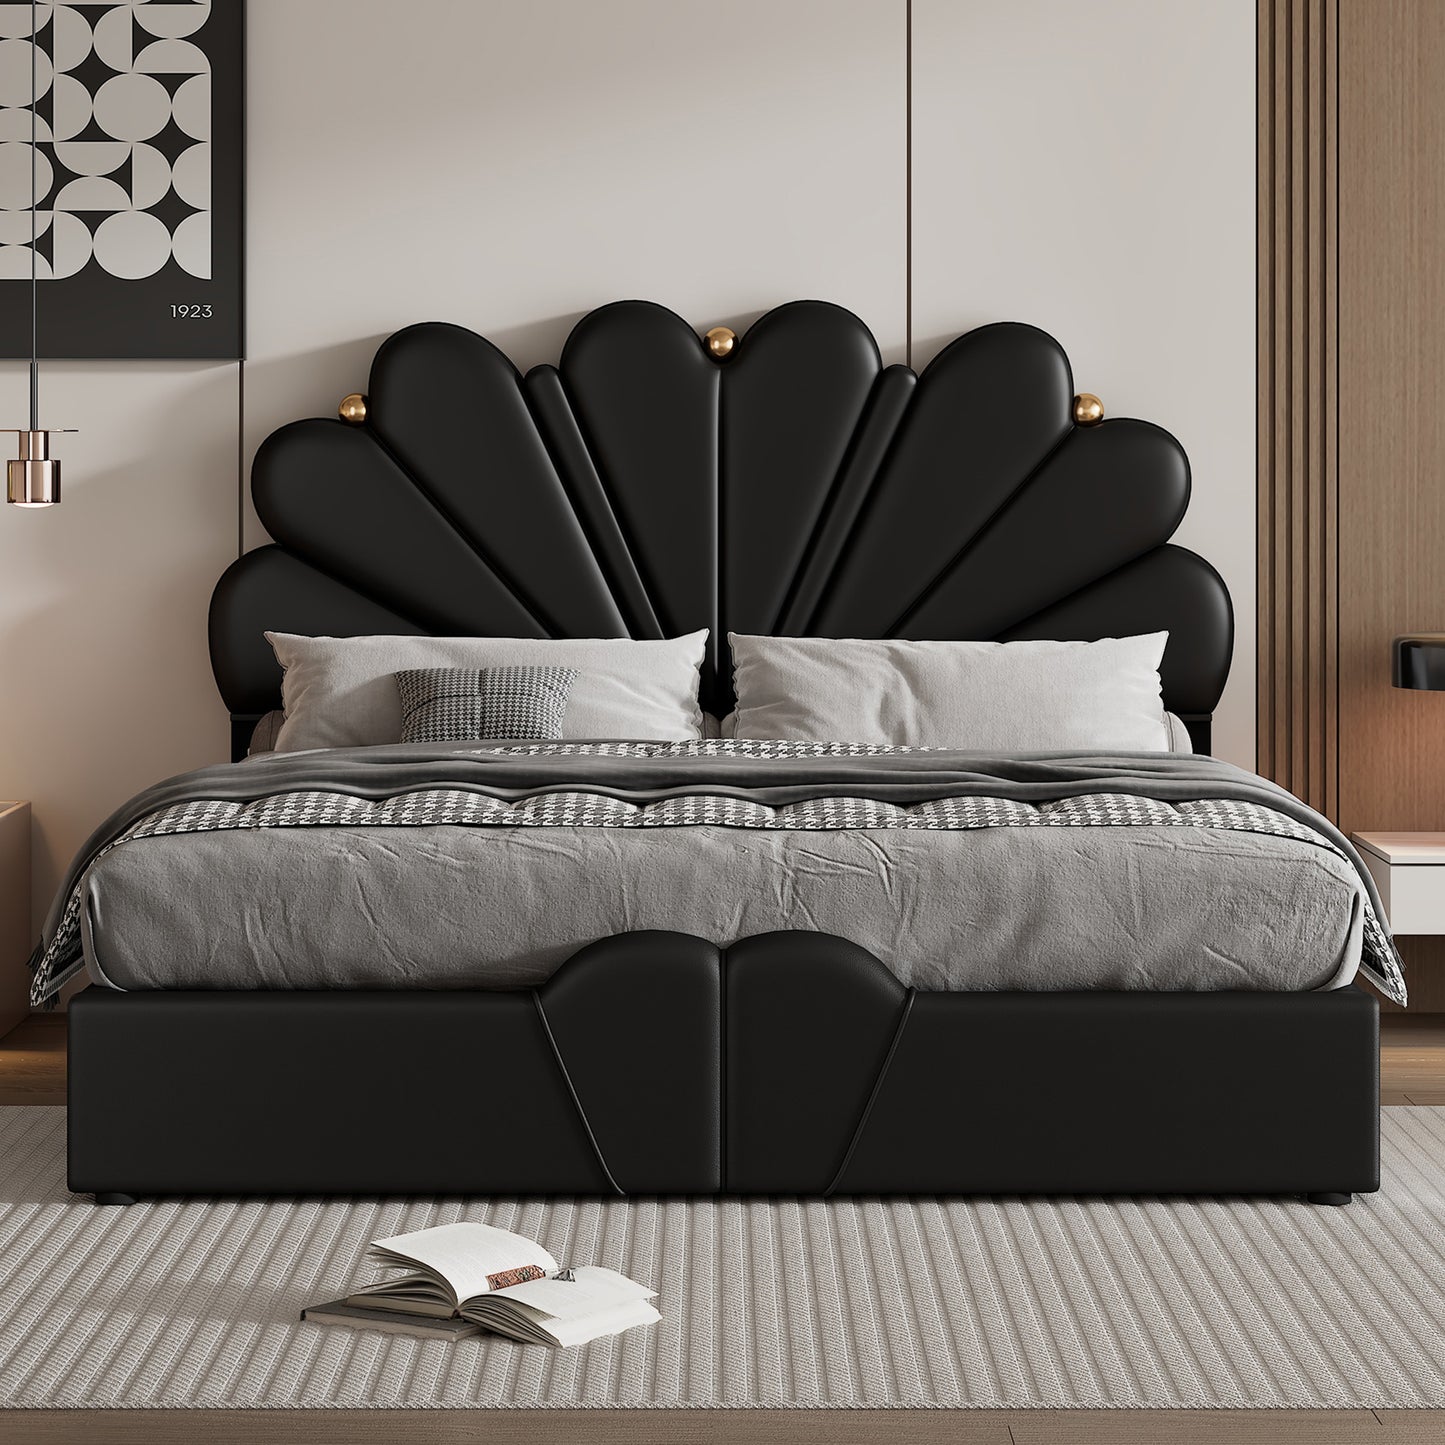 Queen Size Upholstered  Petal Shaped Platform Bed  with Hydraulic Storage System, PU Storage Bed, Decorated with metal balls, Black